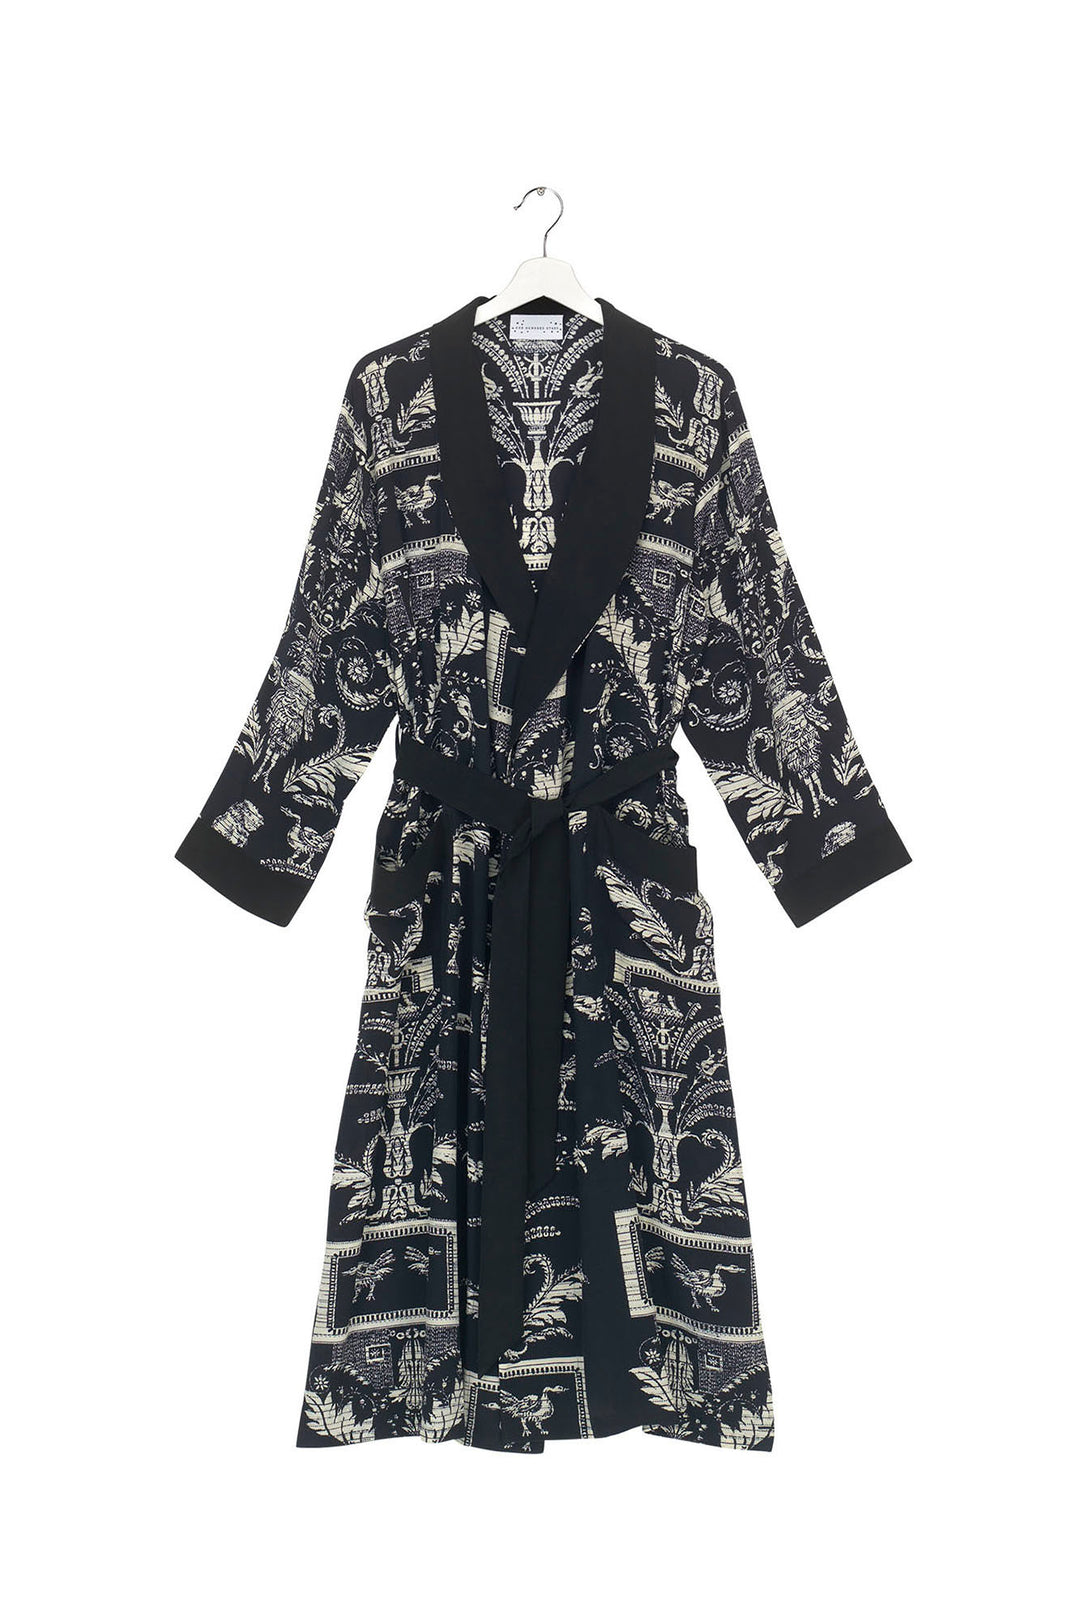 ladies long length belted dressing gown in black and white vintage damask print by One Hundred Stars